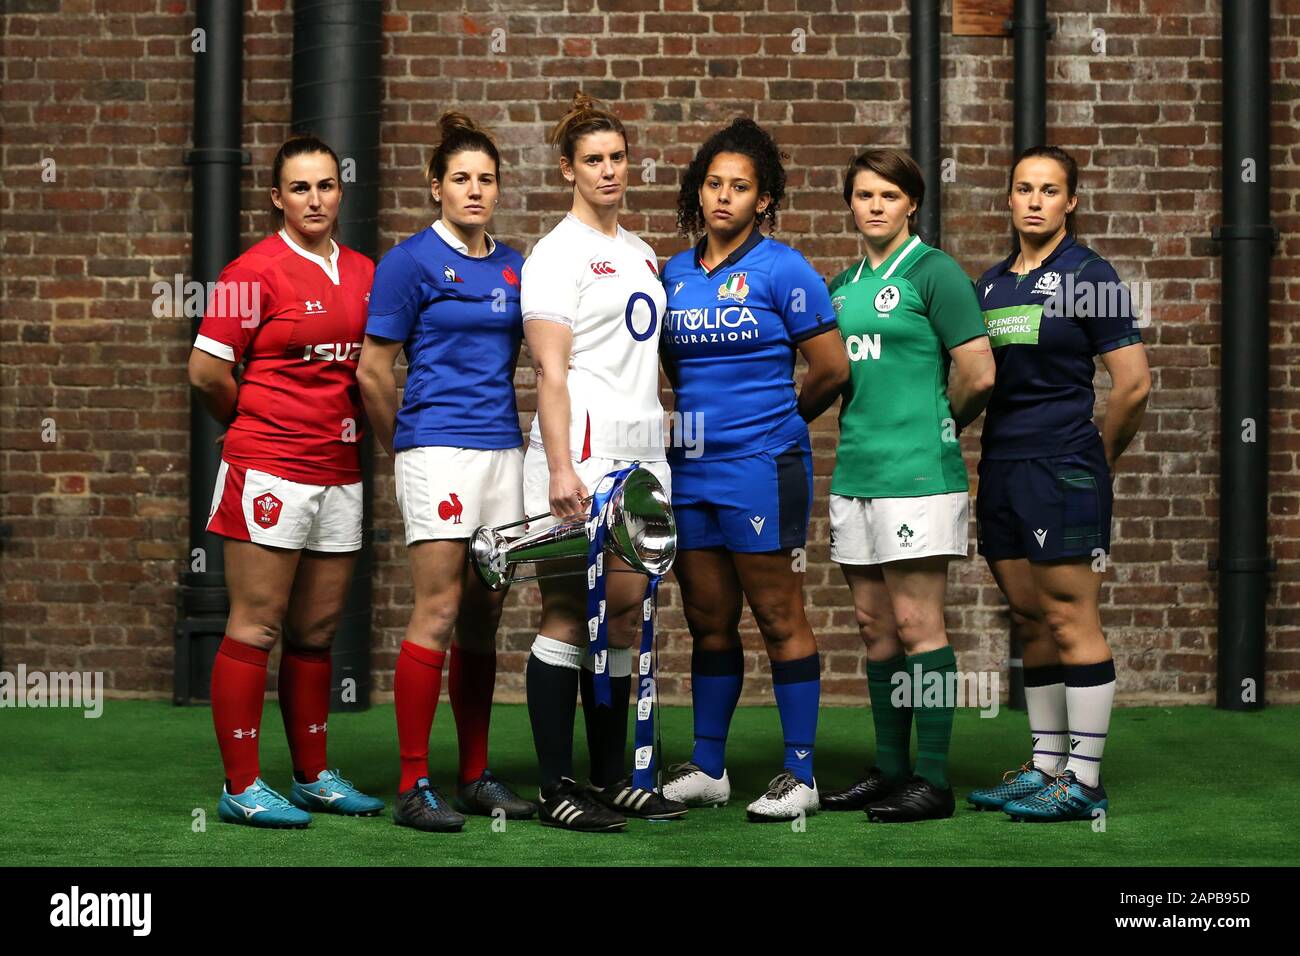 Women's team captains (left to right) Wales' Siwan Lillicrap, France's  Gaelle Hermet, England's Sarah Hunter, Italy's Giada Franco, Ireland's Ciara  Griffin and Scotland's Rachel Malcolm during the Guinness Six Nations  launch at